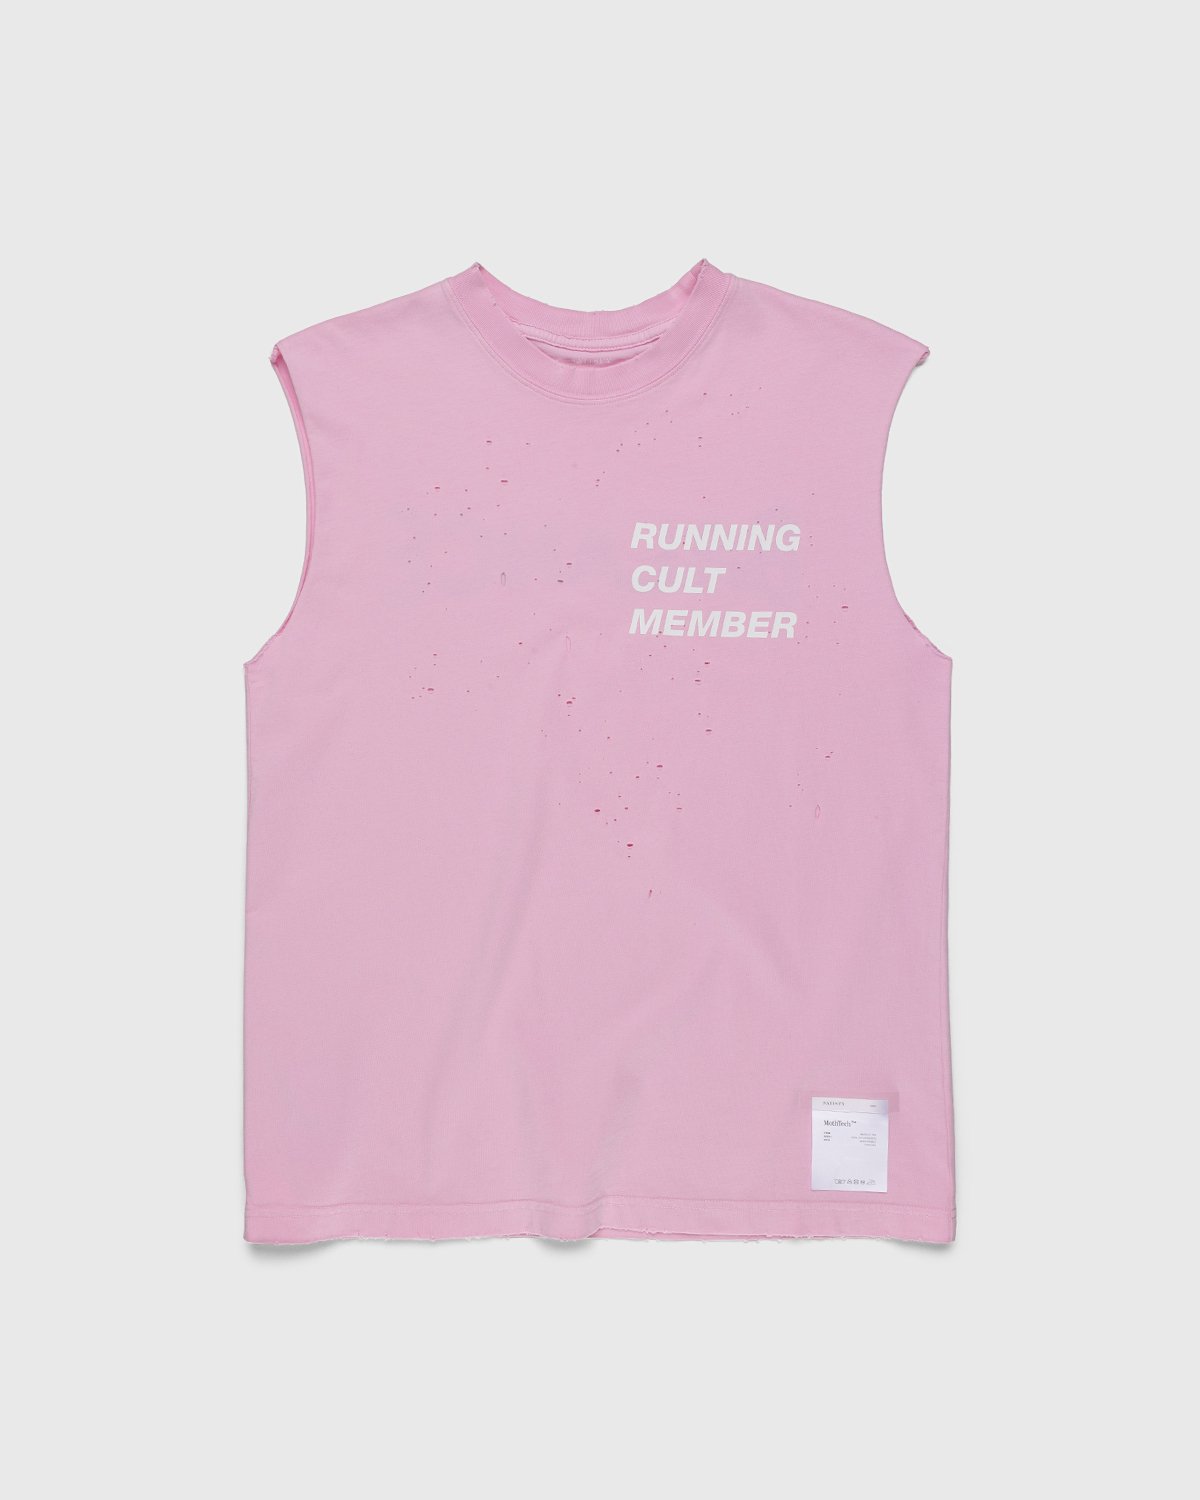 Satisfy x Highsnobiety - HS Sports Balance Muscle Tee Pink - Clothing - Pink - Image 1